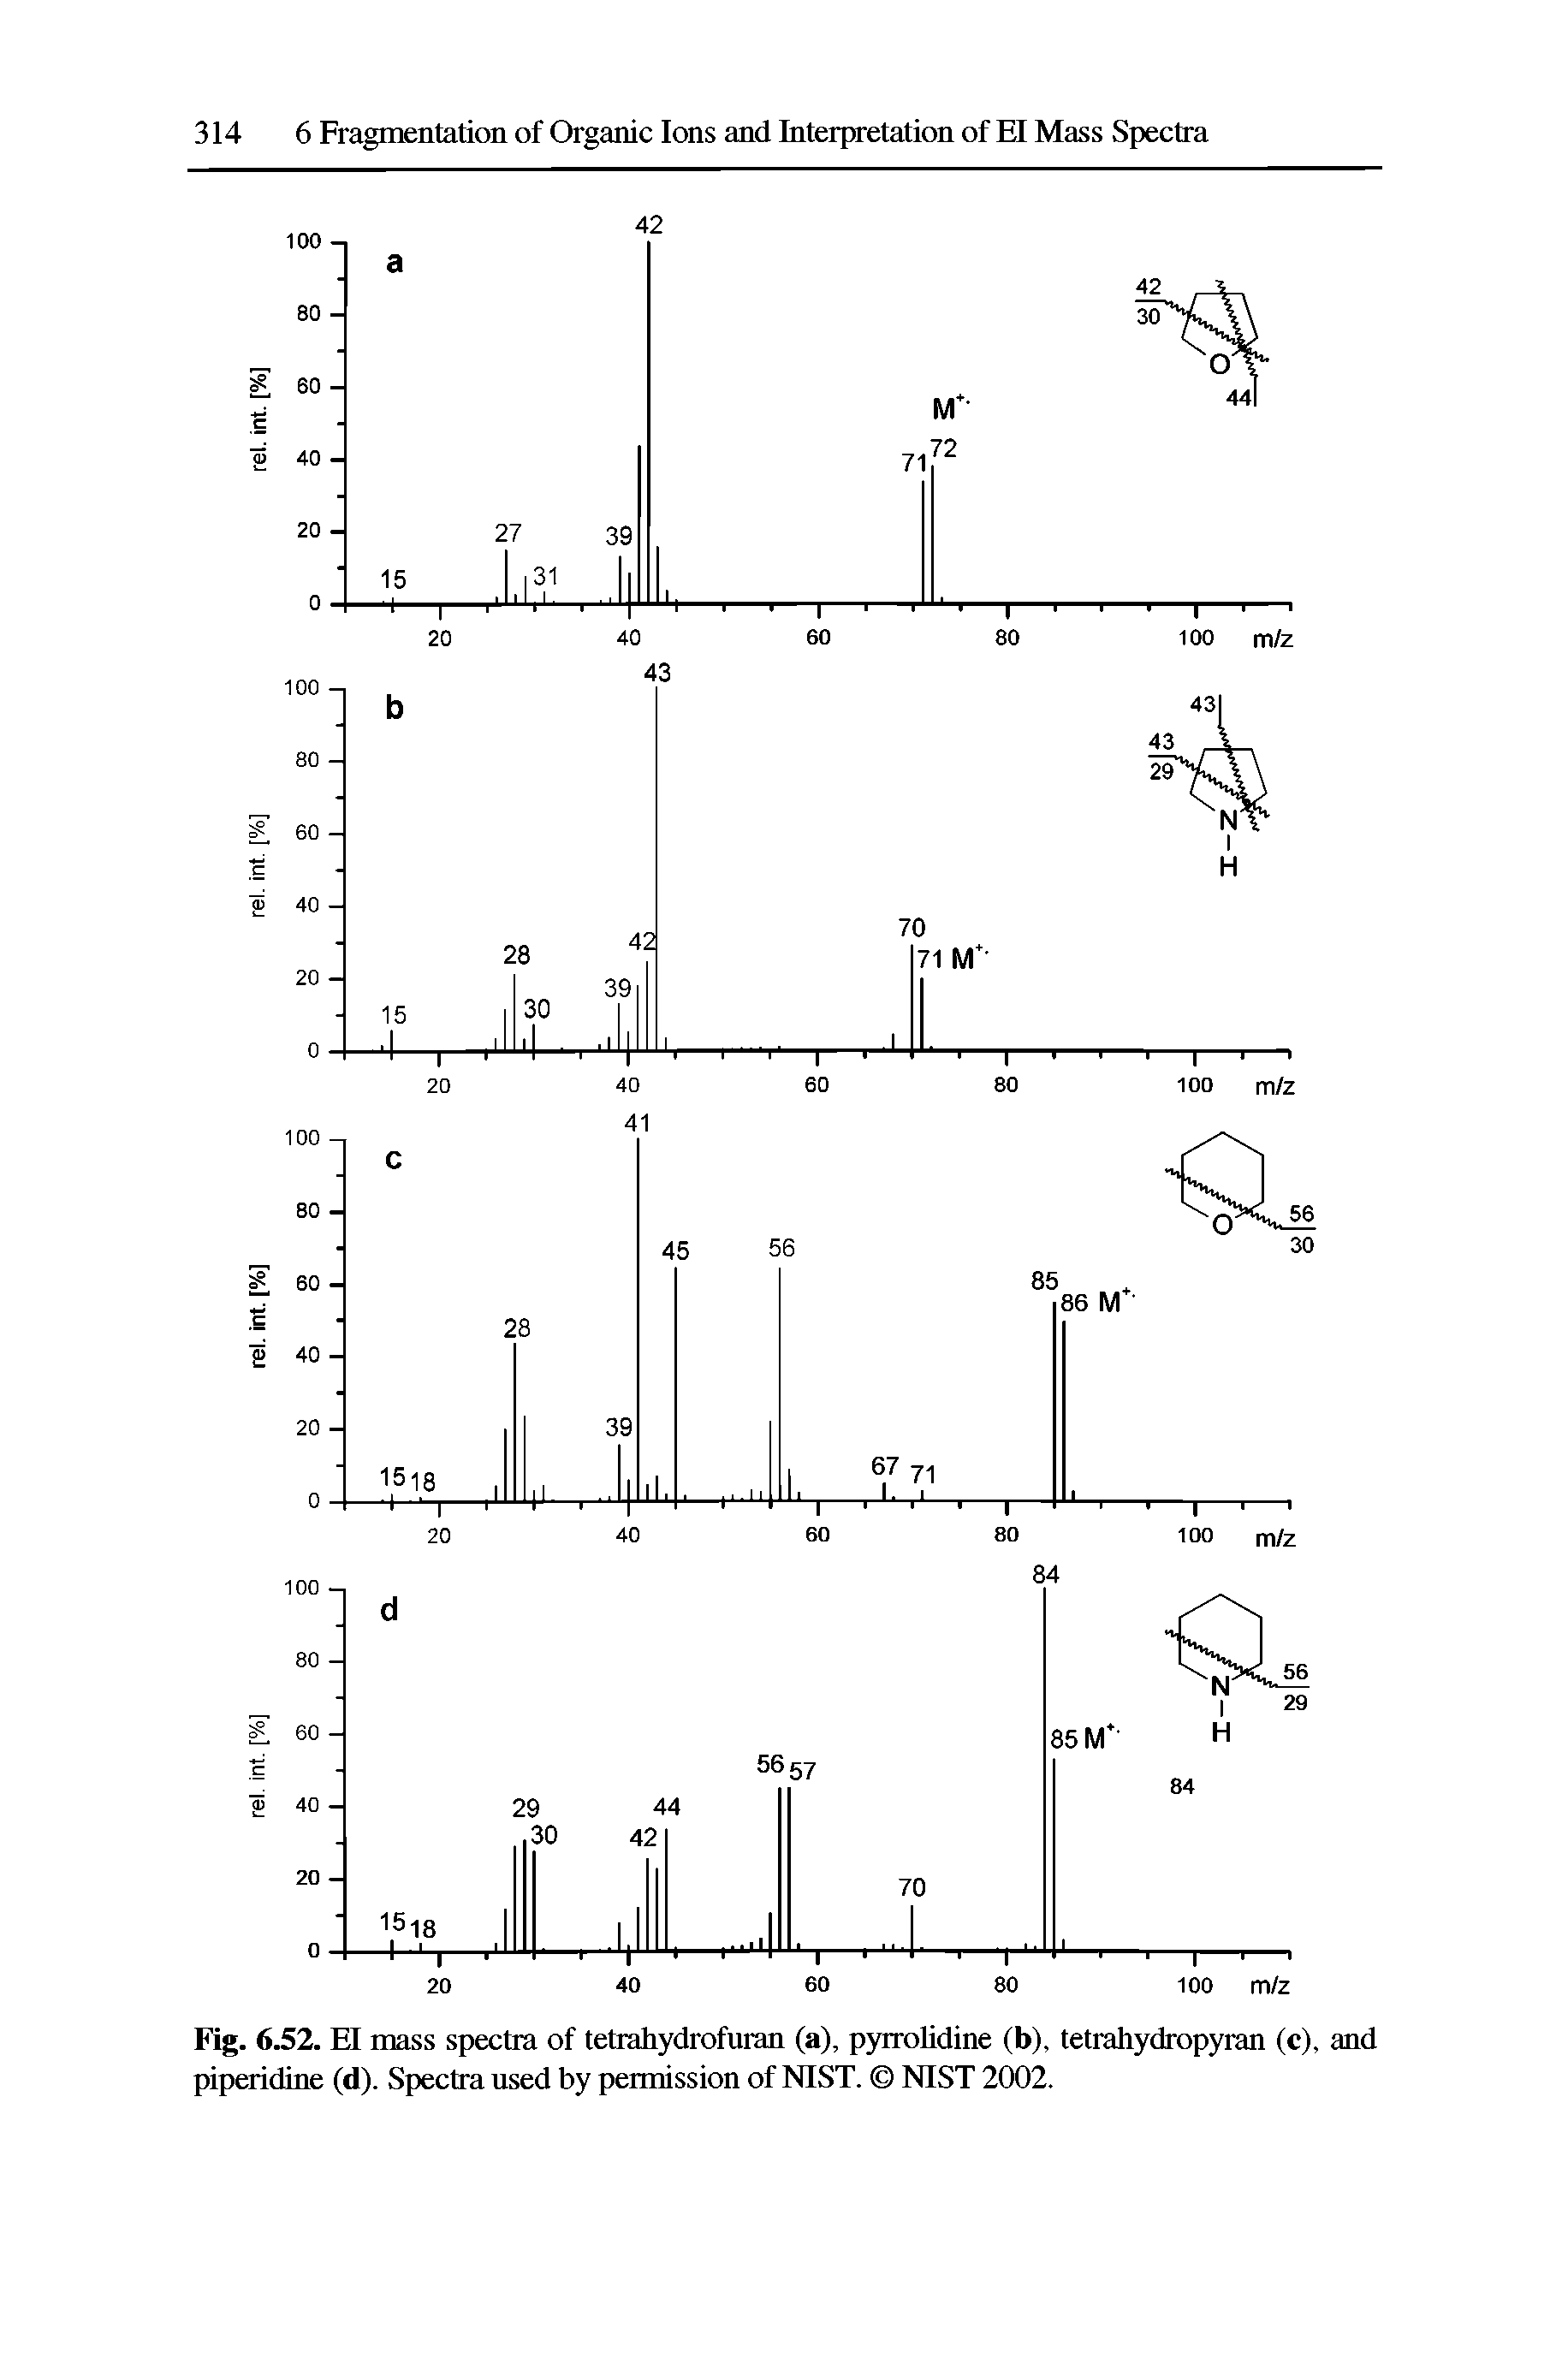 Fig. 6.52. El mass spectra of tetrahydrofuran (a), pyrrolidine (b), tetrahydropyran (c), and piperidine (d). Spectra used by permission of NIST. NIST 2002.